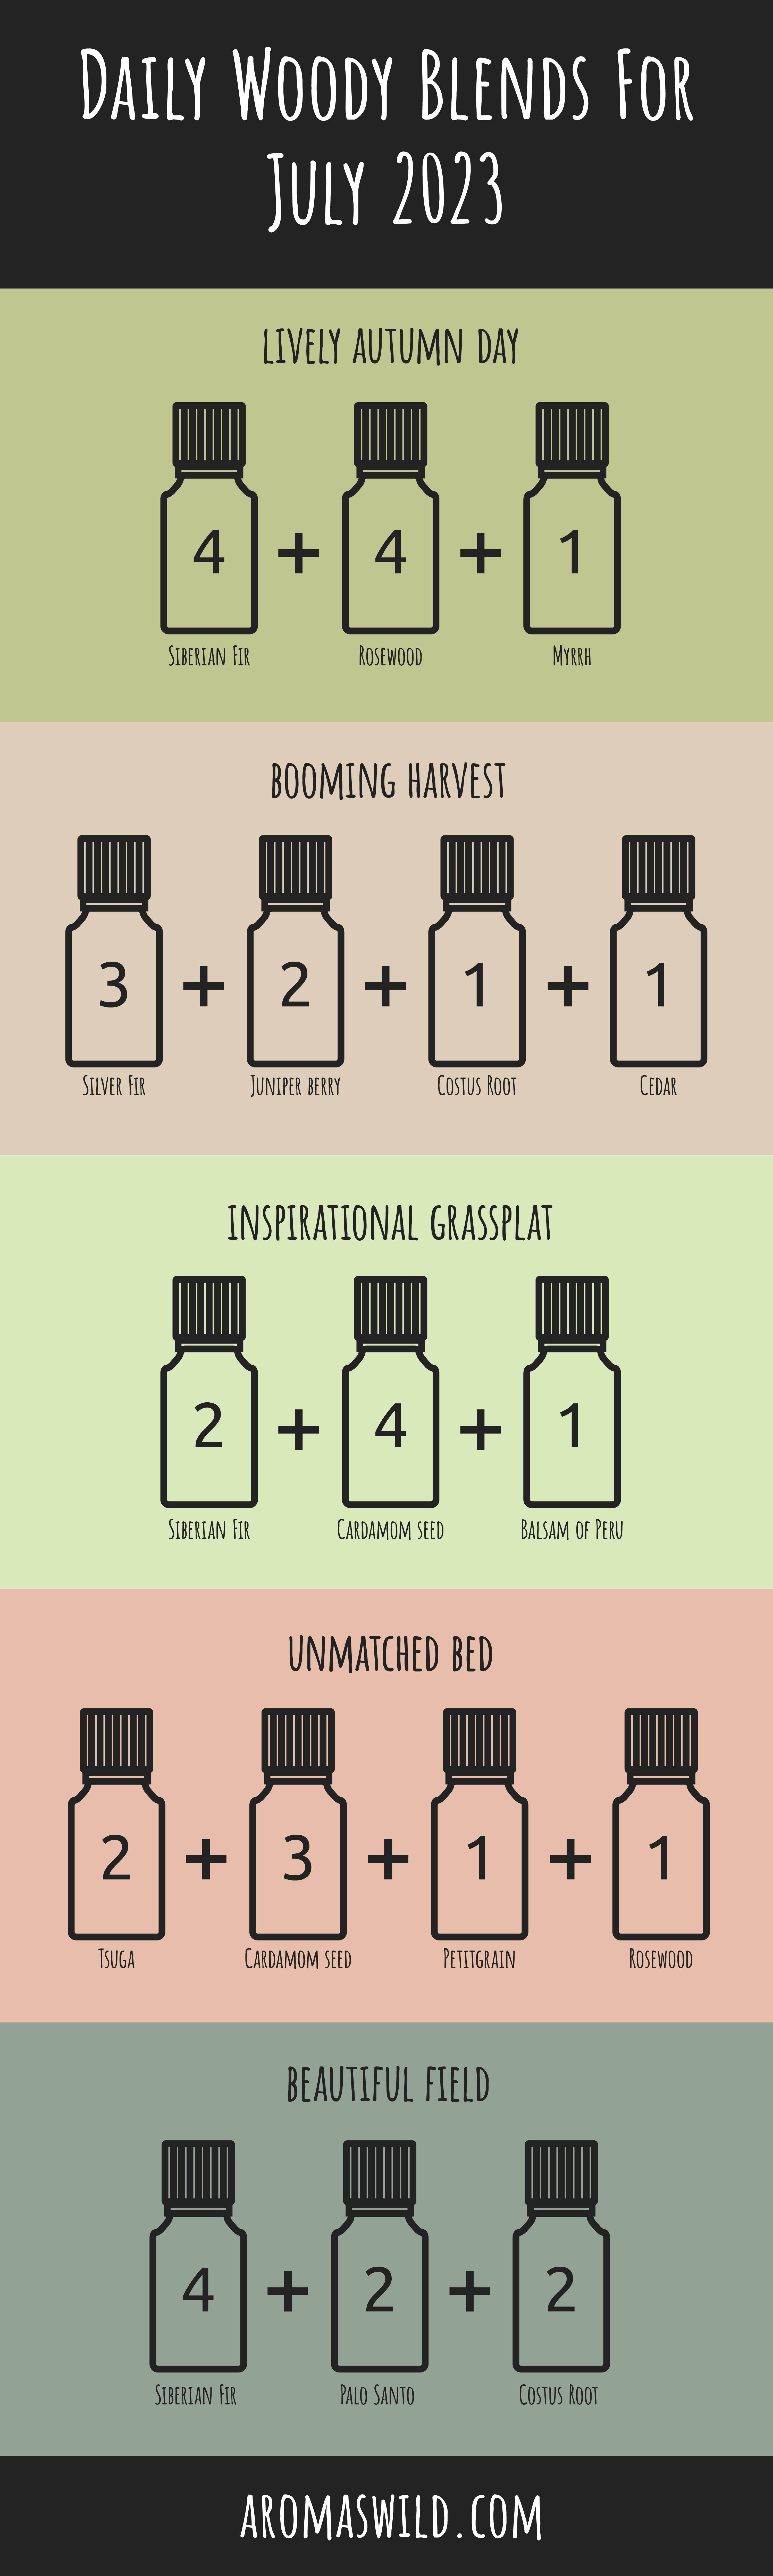 Top Wood Essential Oils To Use In Diffuser – Daily Woody Blends For 2 July 2023